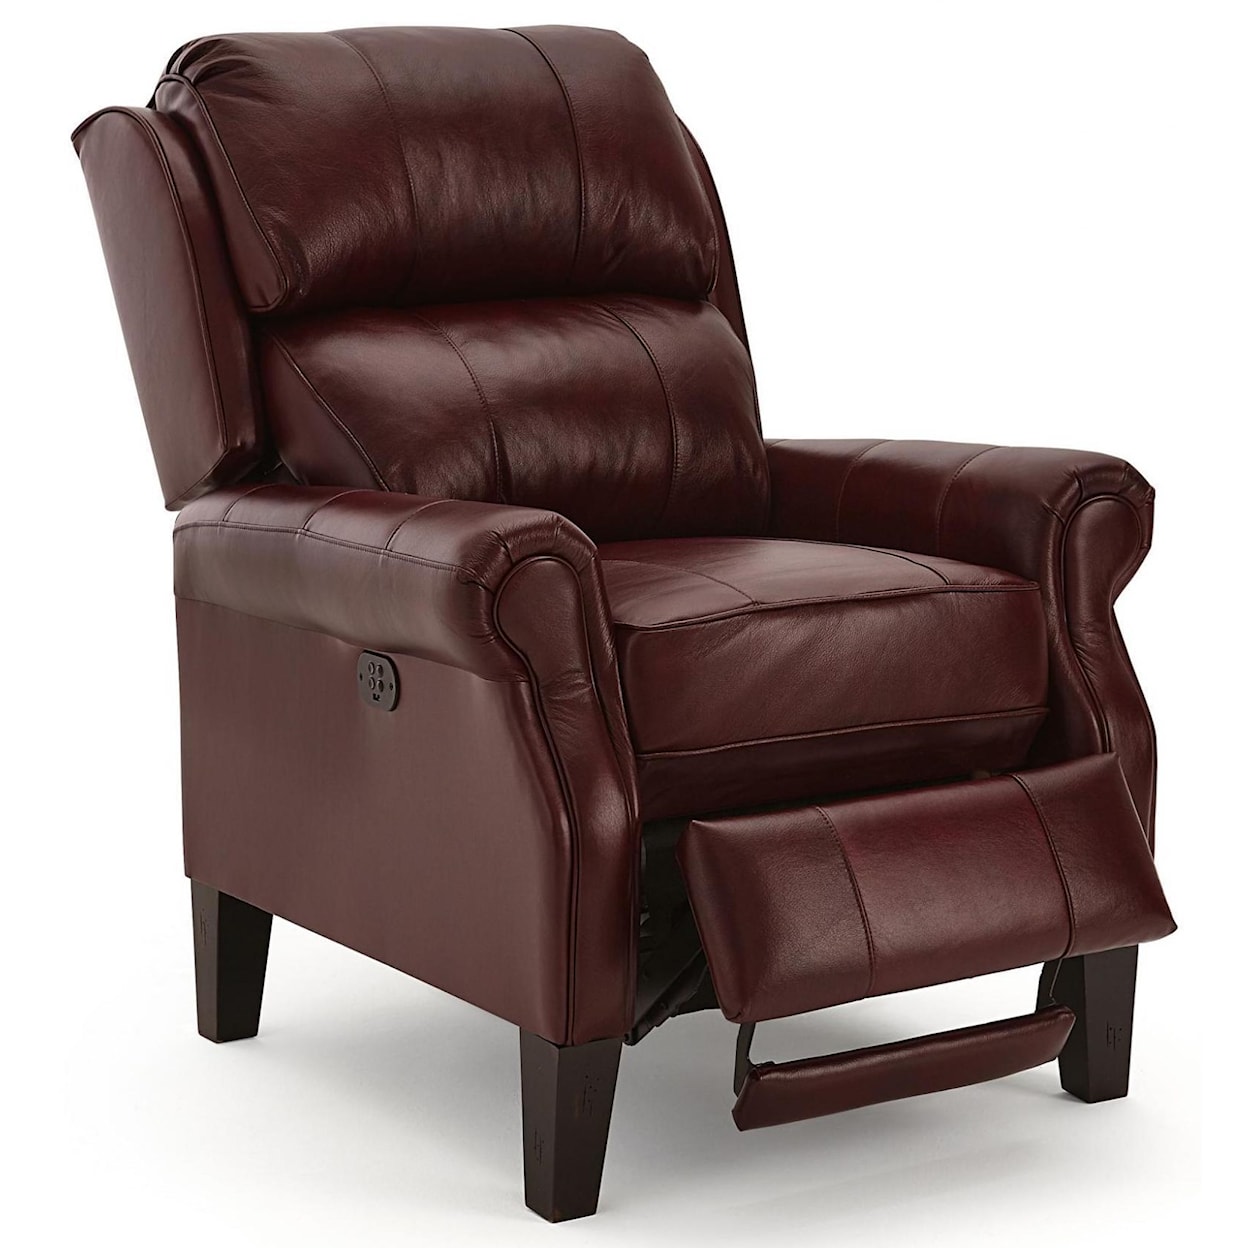 Best Home Furnishings Pushback Recliners Joanna Power Recliner